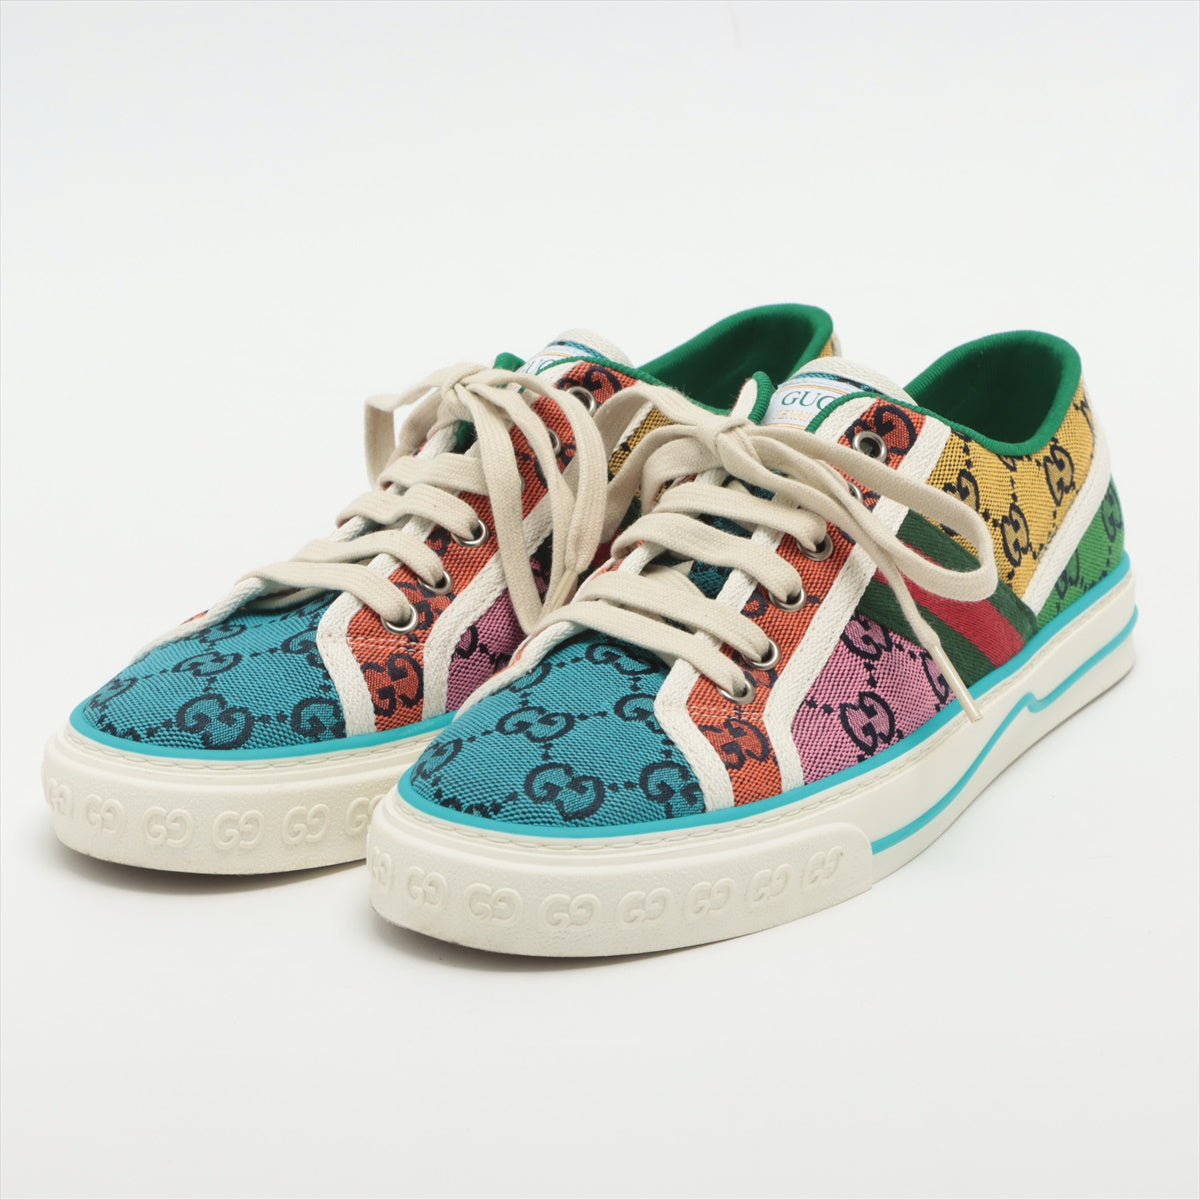 Gucci GG canvass Sneakers 39+ Ladies' Multicolor Tennis 1977